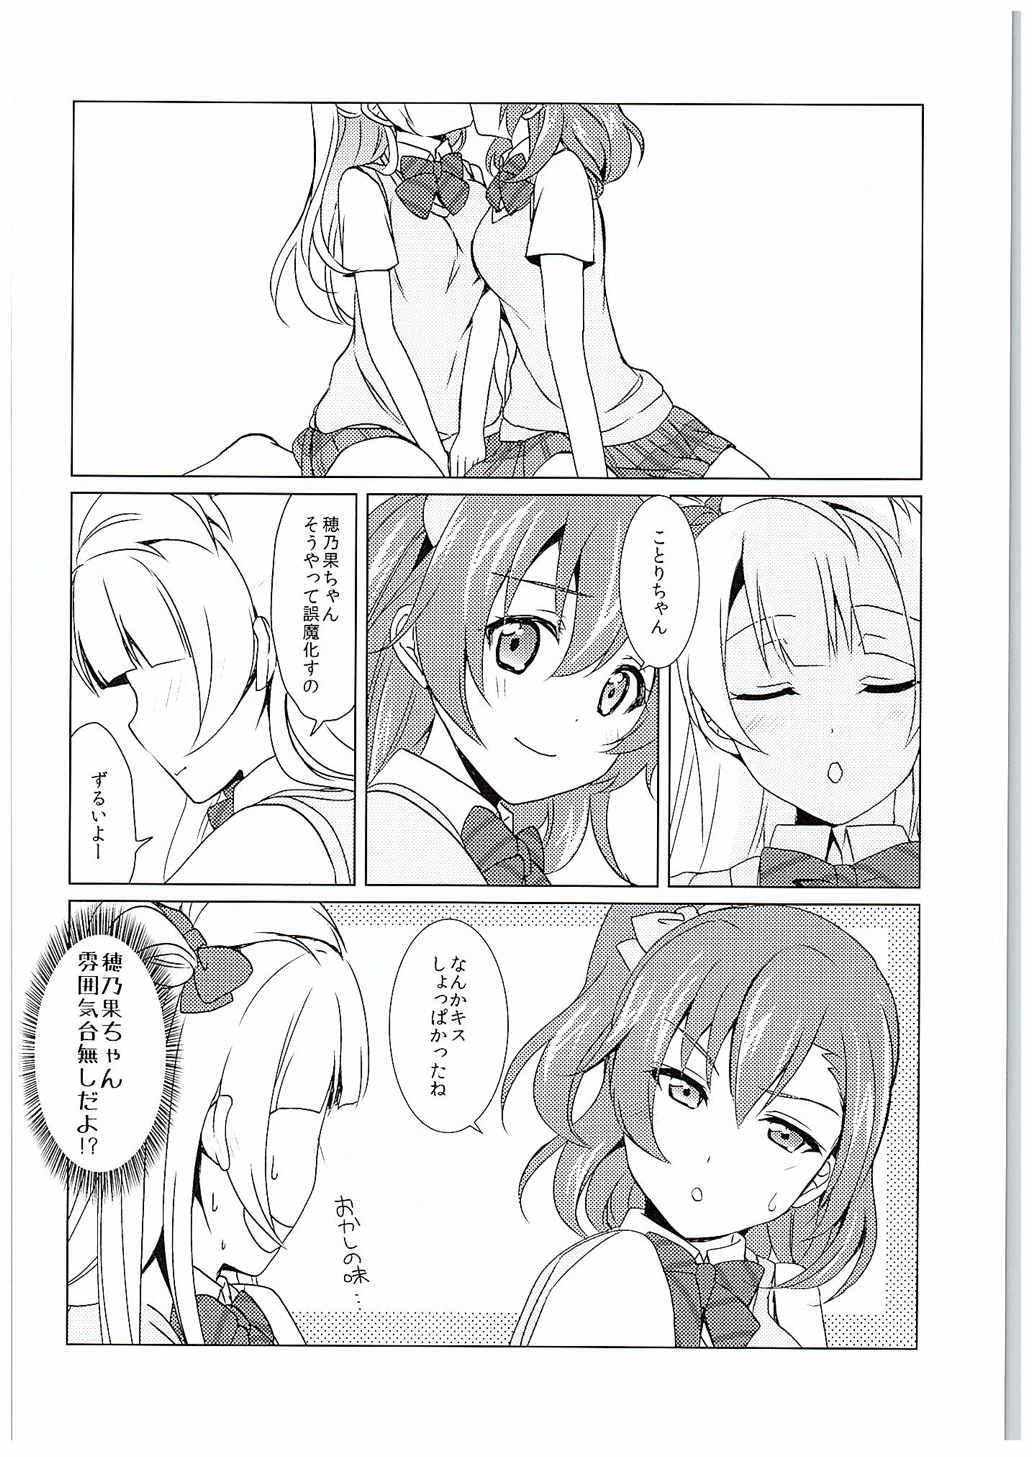 Hot Girls Getting Fucked µ'2 ←Counterattack - Love live Firsttime - Page 7